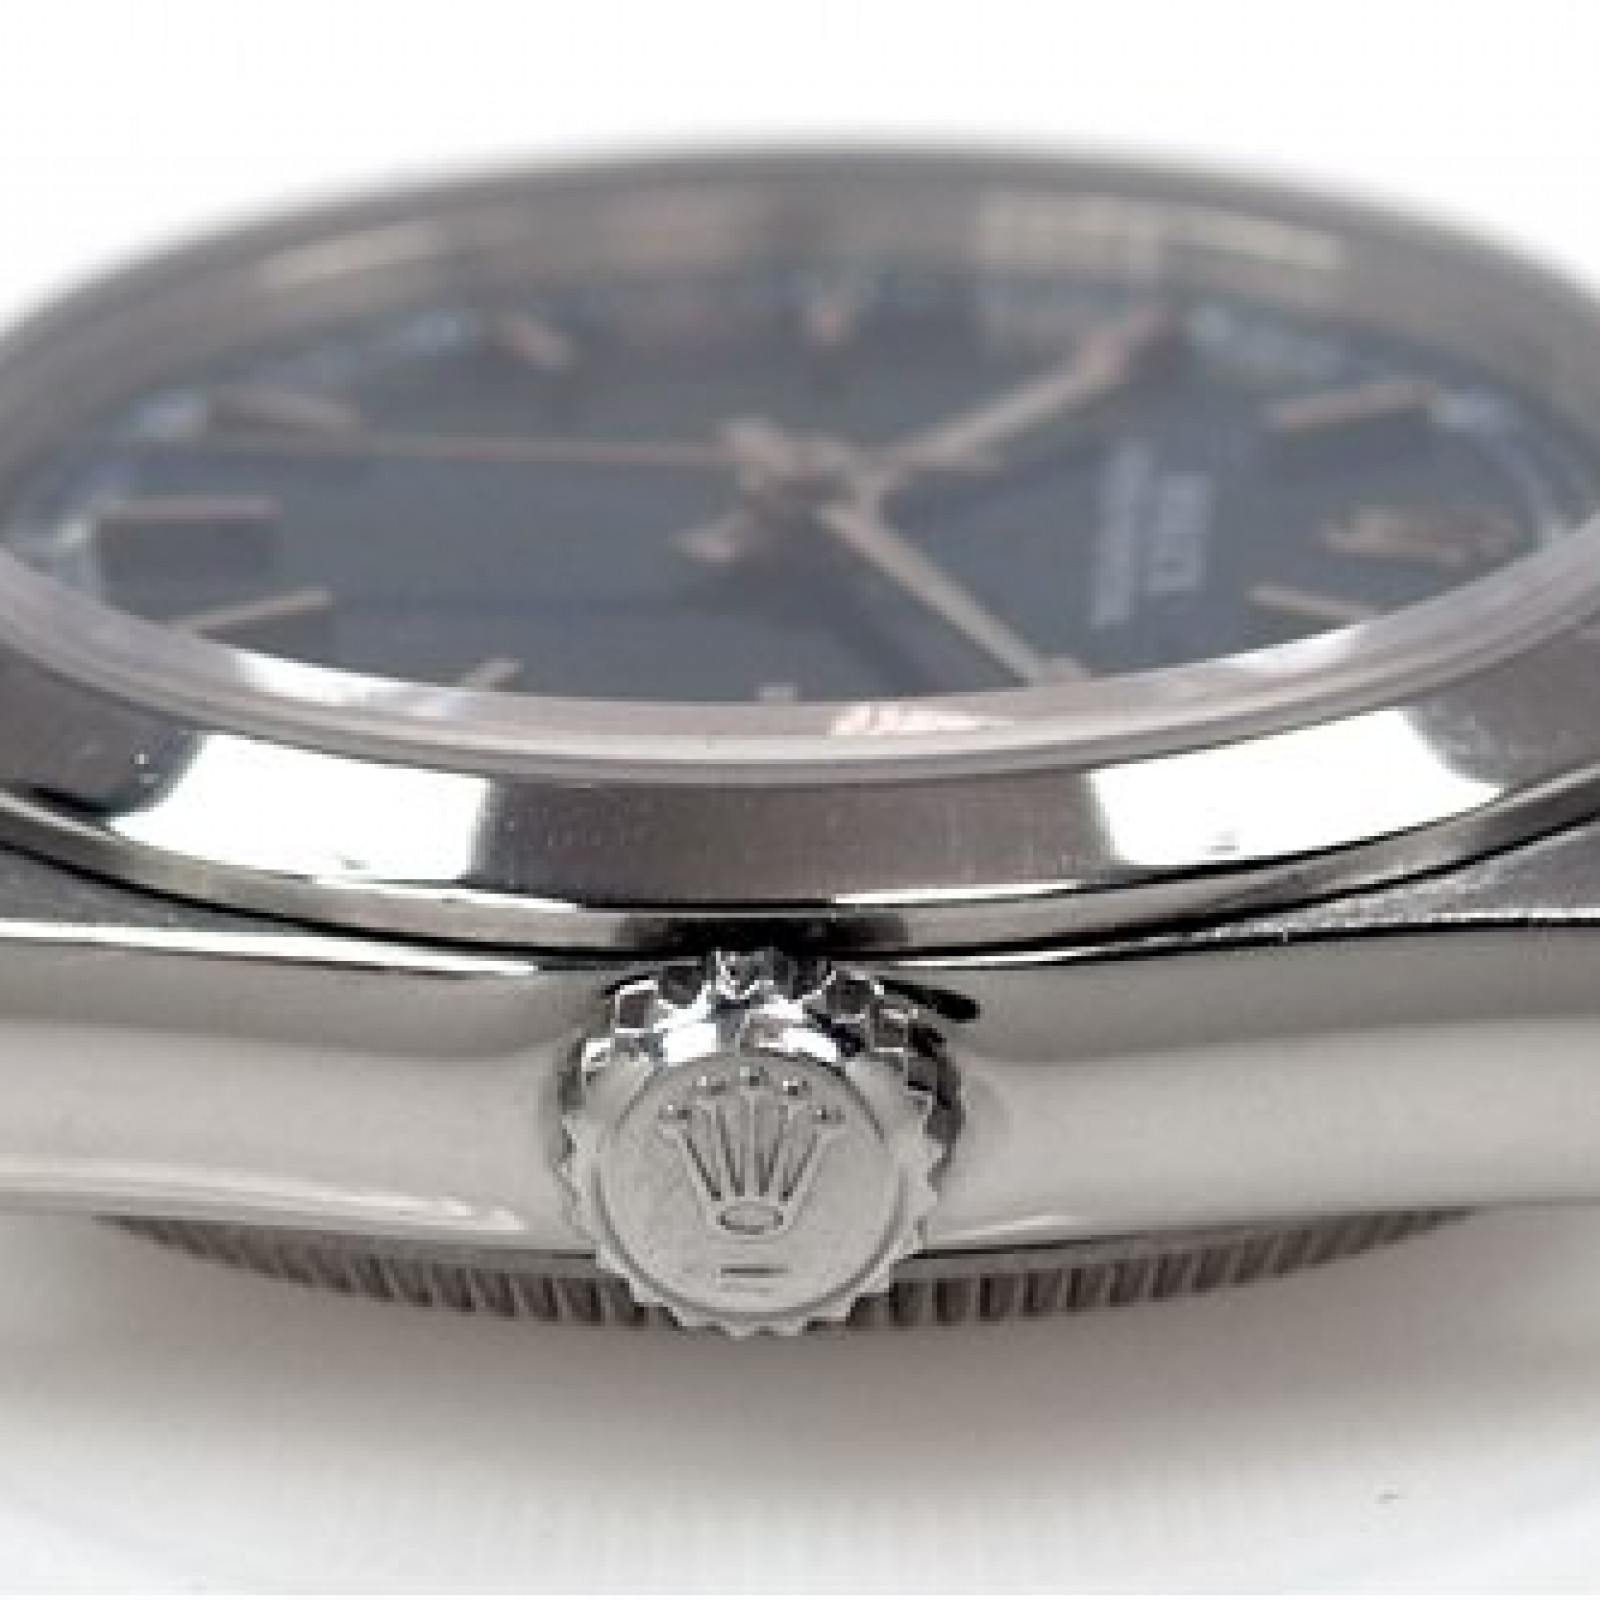 Rolex Oyster Perpetual 77080 Steel